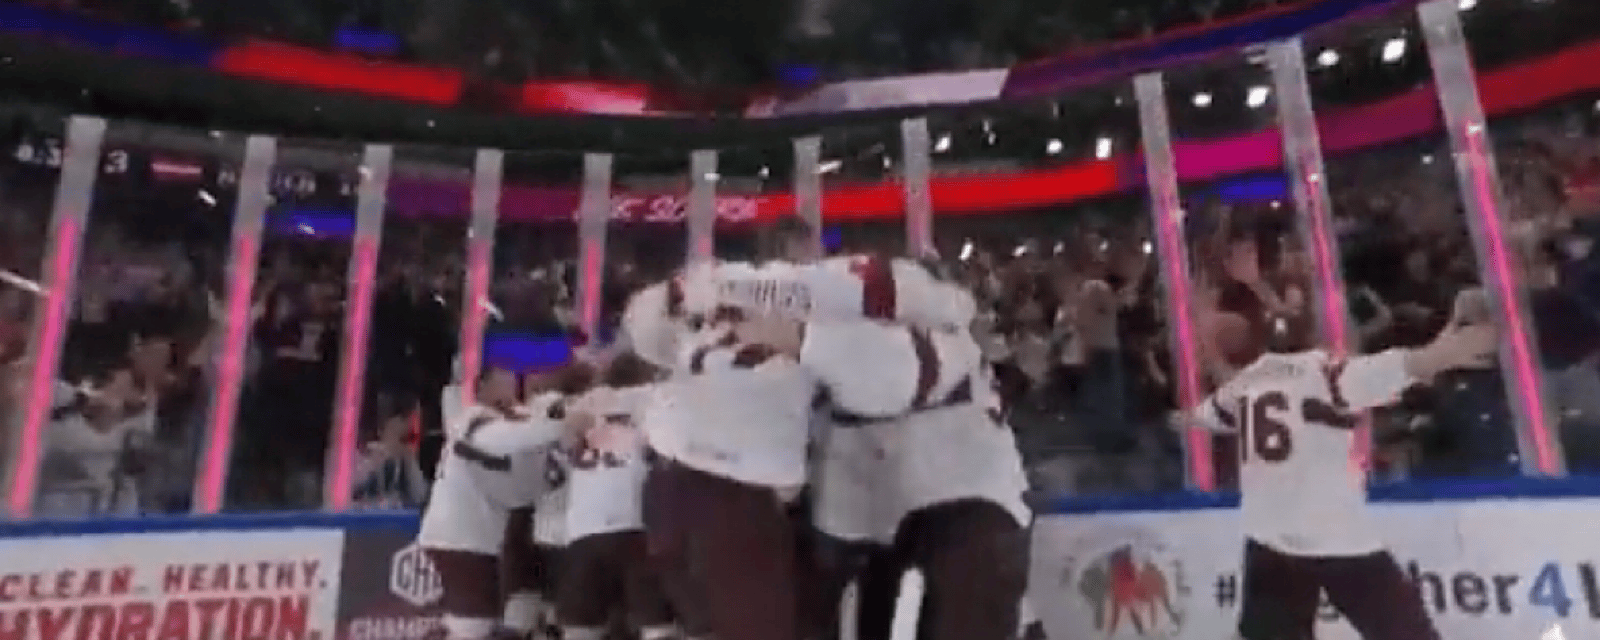 Latvia upsets USA at the World Championship in first ever medal win!